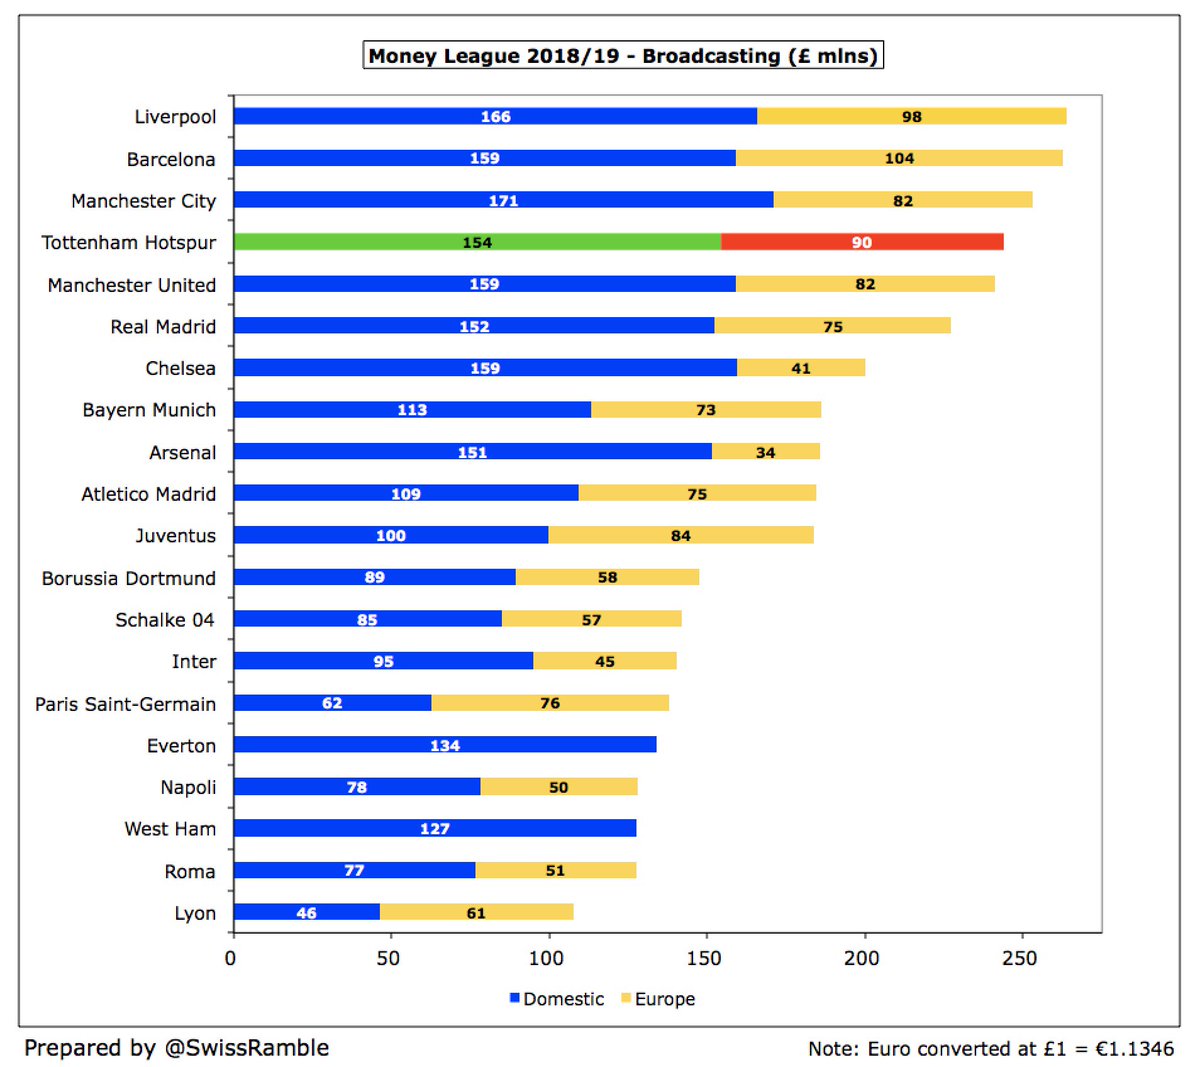  #THFC broadcasting income rose £43m (22%) from £201m to £244m, comprising £150m domestic TV and £94m Champions League prize money (per club accounts). This was the 4th highest in Europe, only below  #LFC £264m, Barcelona £263m and  #MCFC £253m.